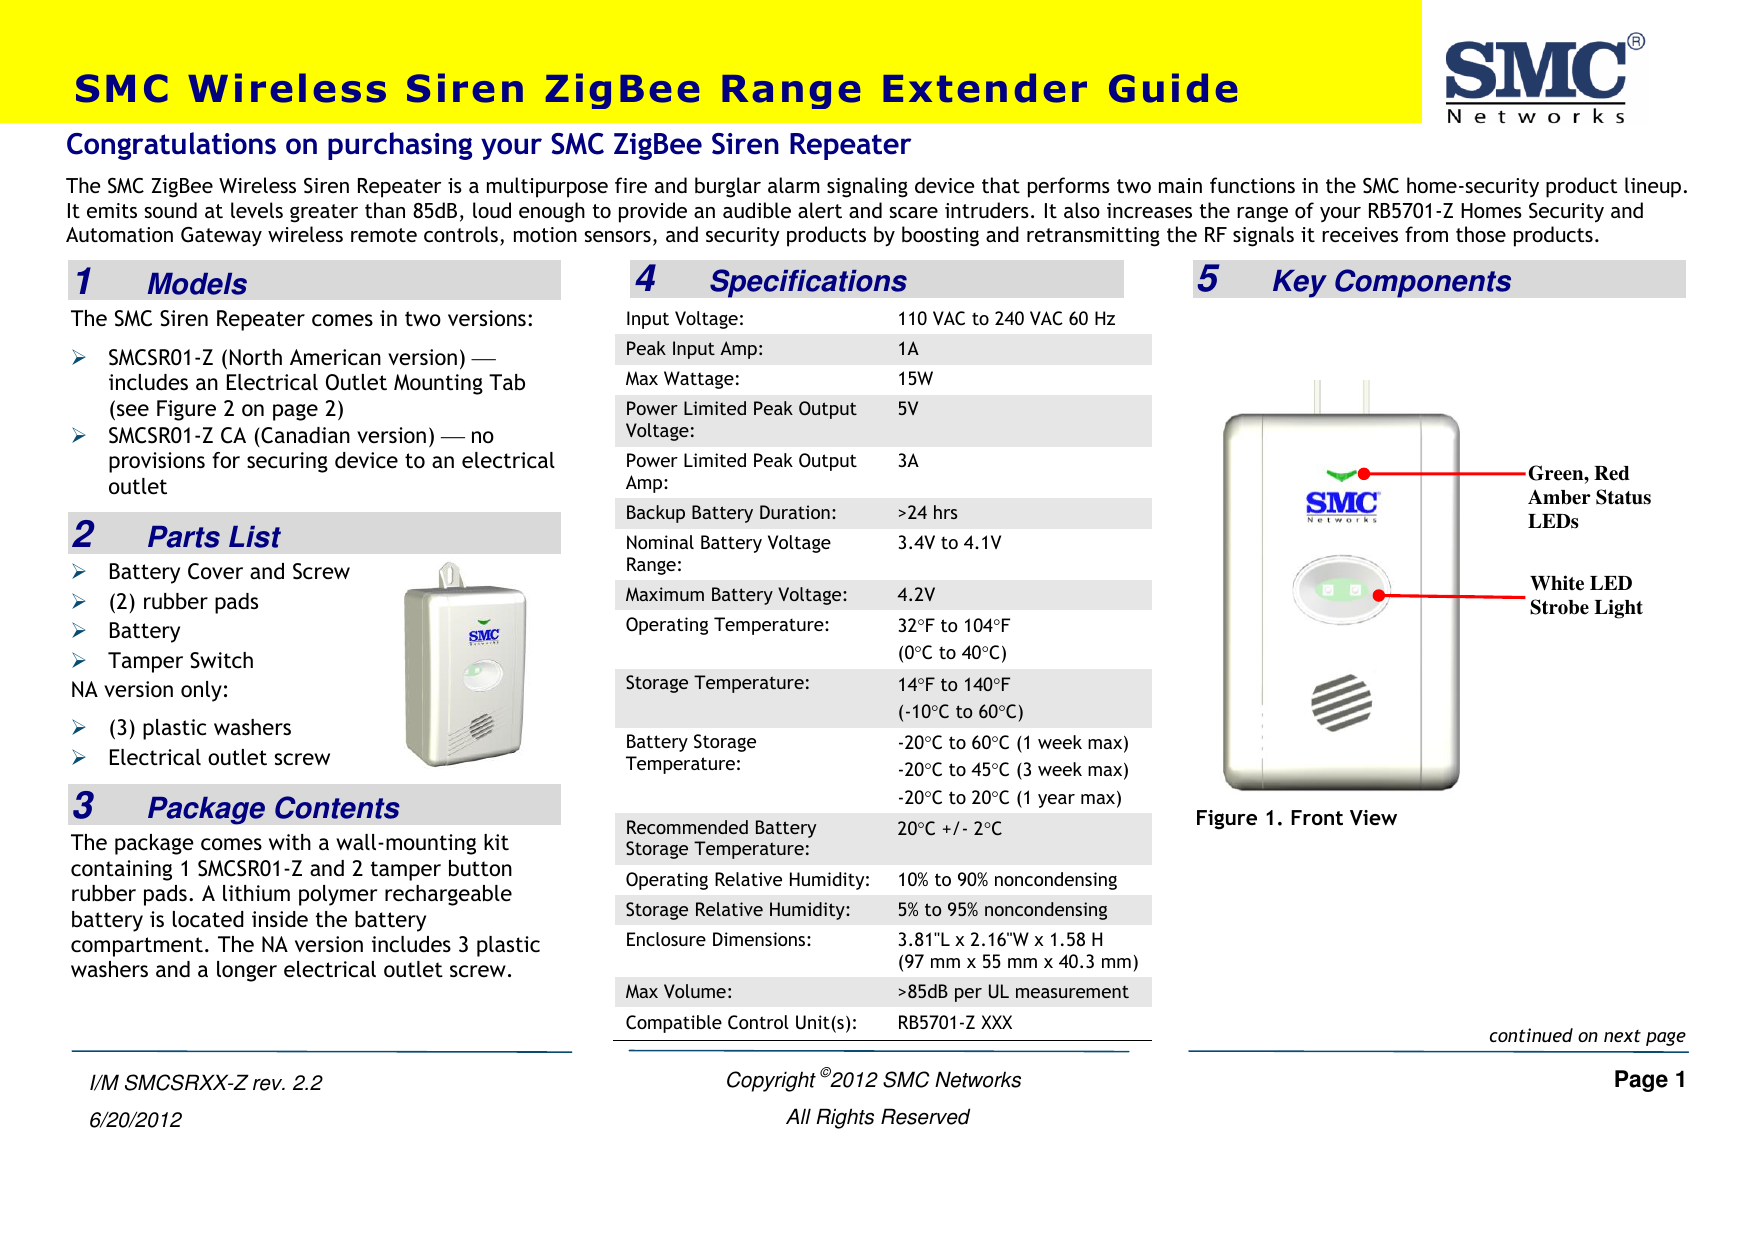    Copyright ©2012 SMC Networks   Page 1 All Rights Reserved  I/M SMCSRXX-Z rev. 2.2 6/20/2012  1    Models The SMC Siren Repeater comes in two versions:  SMCSR01-Z (North American version)  includes an Electrical Outlet Mounting Tab (see Figure 2 on page 2)  SMCSR01-Z CA (Canadian version)  no provisions for securing device to an electrical outlet 2    Parts List  Battery Cover and Screw  (2) rubber pads  Battery  Tamper Switch NA version only:  (3) plastic washers  Electrical outlet screw 3    Package Contents The package comes with a wall-mounting kit containing 1 SMCSR01-Z and 2 tamper button rubber pads. A lithium polymer rechargeable battery is located inside the battery compartment. The NA version includes 3 plastic washers and a longer electrical outlet screw.    4    Specifications Input Voltage: 110 VAC to 240 VAC 60 Hz Peak Input Amp: 1A Max Wattage: 15W Power Limited Peak Output Voltage: 5V Power Limited Peak Output Amp: 3A Backup Battery Duration: &gt;24 hrs Nominal Battery Voltage Range: 3.4V to 4.1V Maximum Battery Voltage: 4.2V Operating Temperature: 32F to 104F (0C to 40C) Storage Temperature: 14F to 140F  (-10C to 60C) Battery Storage Temperature: -20C to 60C (1 week max)  -20C to 45C (3 week max)  -20C to 20C (1 year max)  Recommended Battery Storage Temperature: 20C +/- 2C Operating Relative Humidity: 10% to 90% noncondensing Storage Relative Humidity: 5% to 95% noncondensing Enclosure Dimensions: 3.81&quot;L x 2.16&quot;W x 1.58 H (97 mm x 55 mm x 40.3 mm) Max Volume: &gt;85dB per UL measurement Compatible Control Unit(s): RB5701-Z XXX  5    Key Components    Figure 1. Front View SMC Wireless Siren ZigBee Range Extender Guide Congratulations on purchasing your SMC ZigBee Siren Repeater  The SMC ZigBee Wireless Siren Repeater is a multipurpose fire and burglar alarm signaling device that performs two main functions in the SMC home-security product lineup. It emits sound at levels greater than 85dB, loud enough to provide an audible alert and scare intruders. It also increases the range of your RB5701-Z Homes Security and Automation Gateway wireless remote controls, motion sensors, and security products by boosting and retransmitting the RF signals it receives from those products.   continued on next page White LED Strobe Light Green, Red Amber Status LEDs 